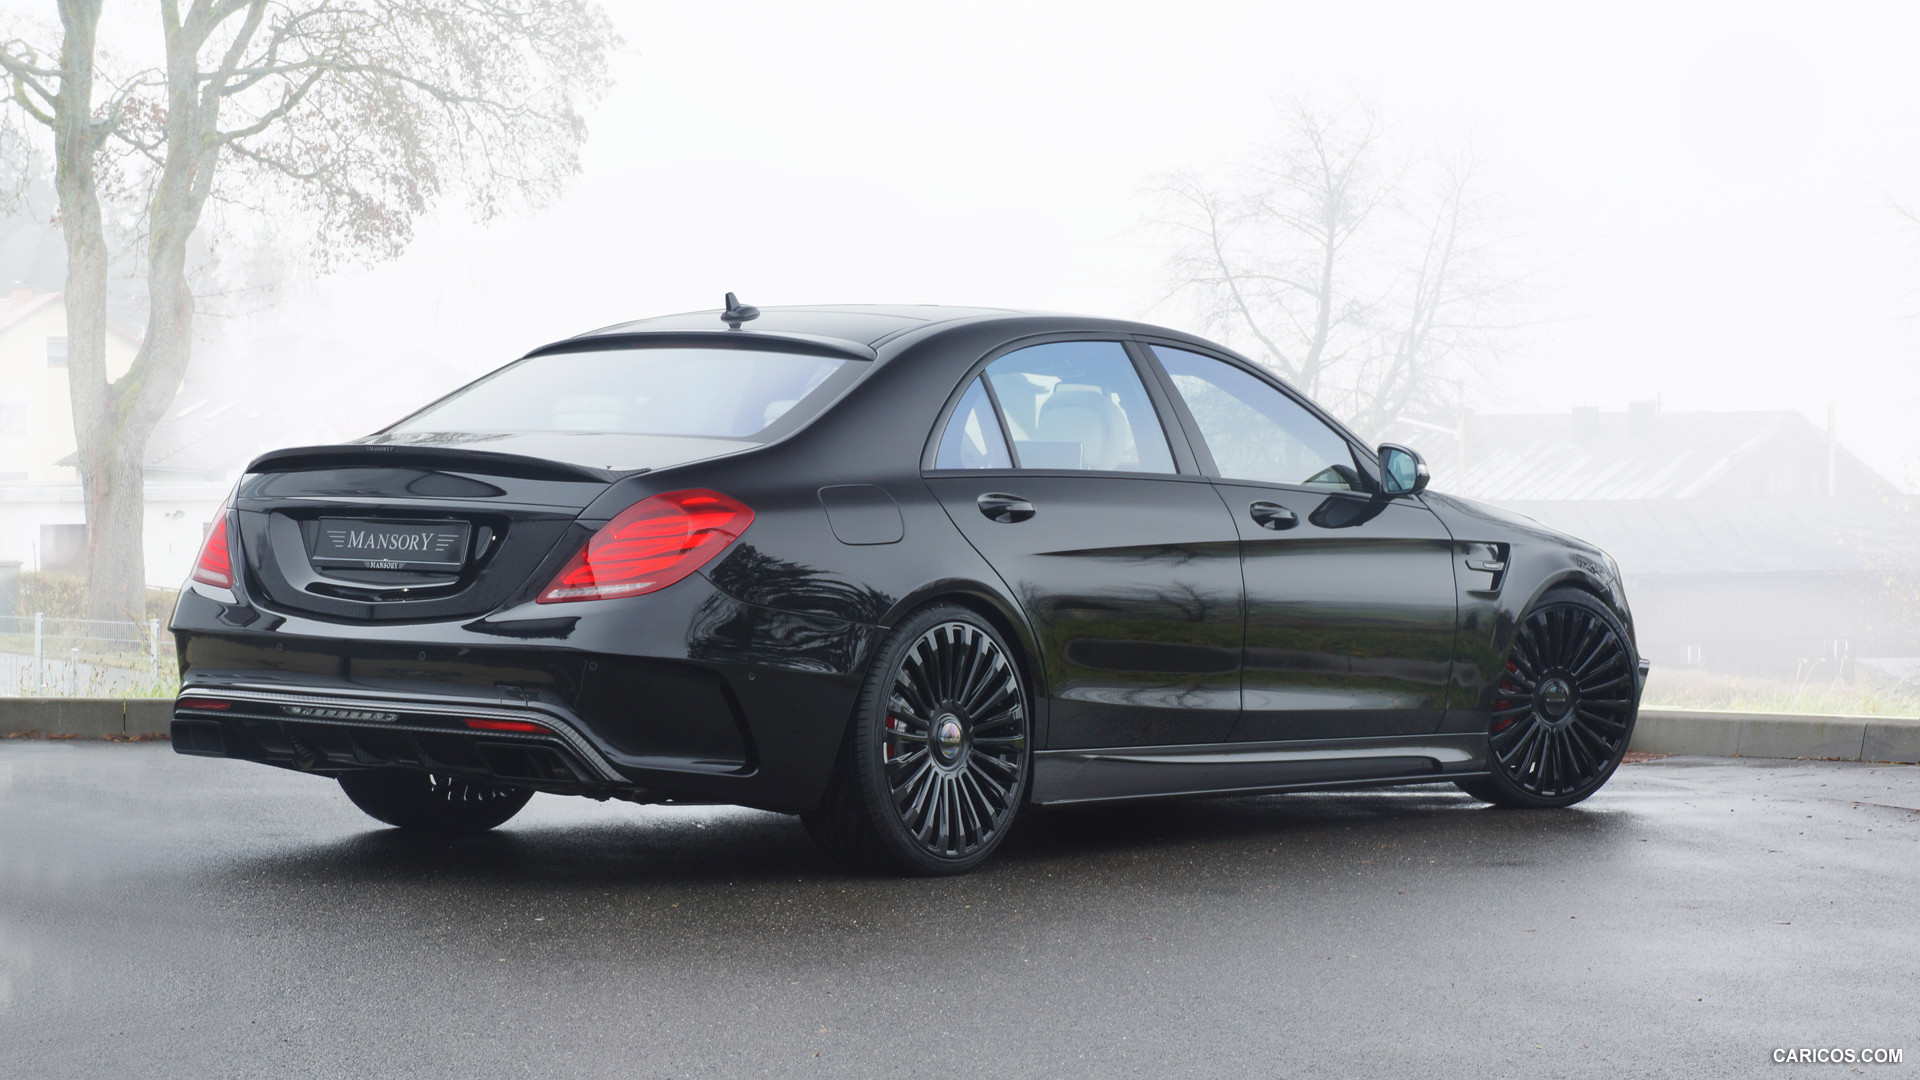 2015 Mansory Mercedes-Benz S63 AMG  - Rear, #2 of 17